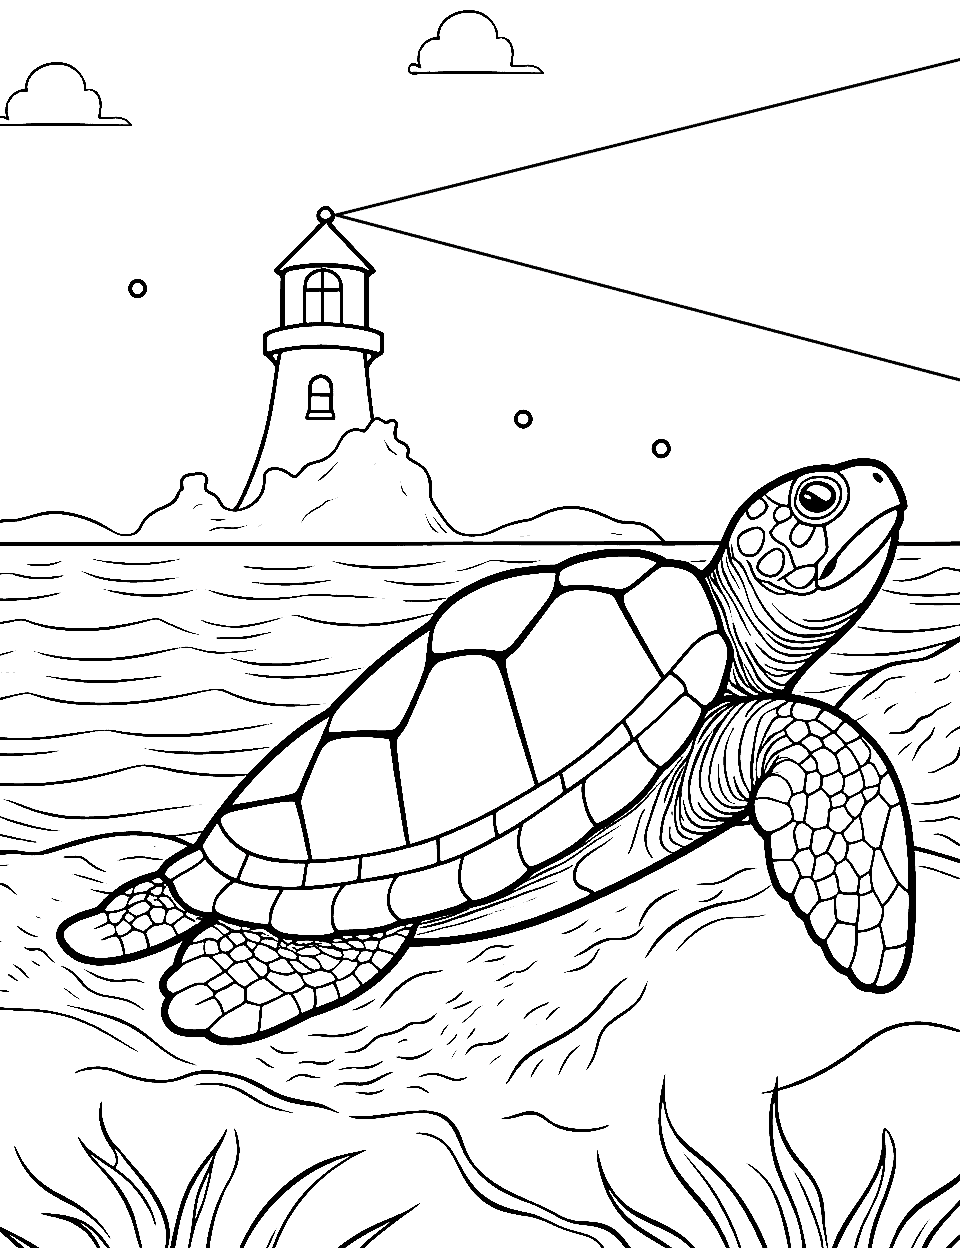 Lighthouse Guided Journey Turtle Coloring Page - A turtle guided by the distant light of a lighthouse.